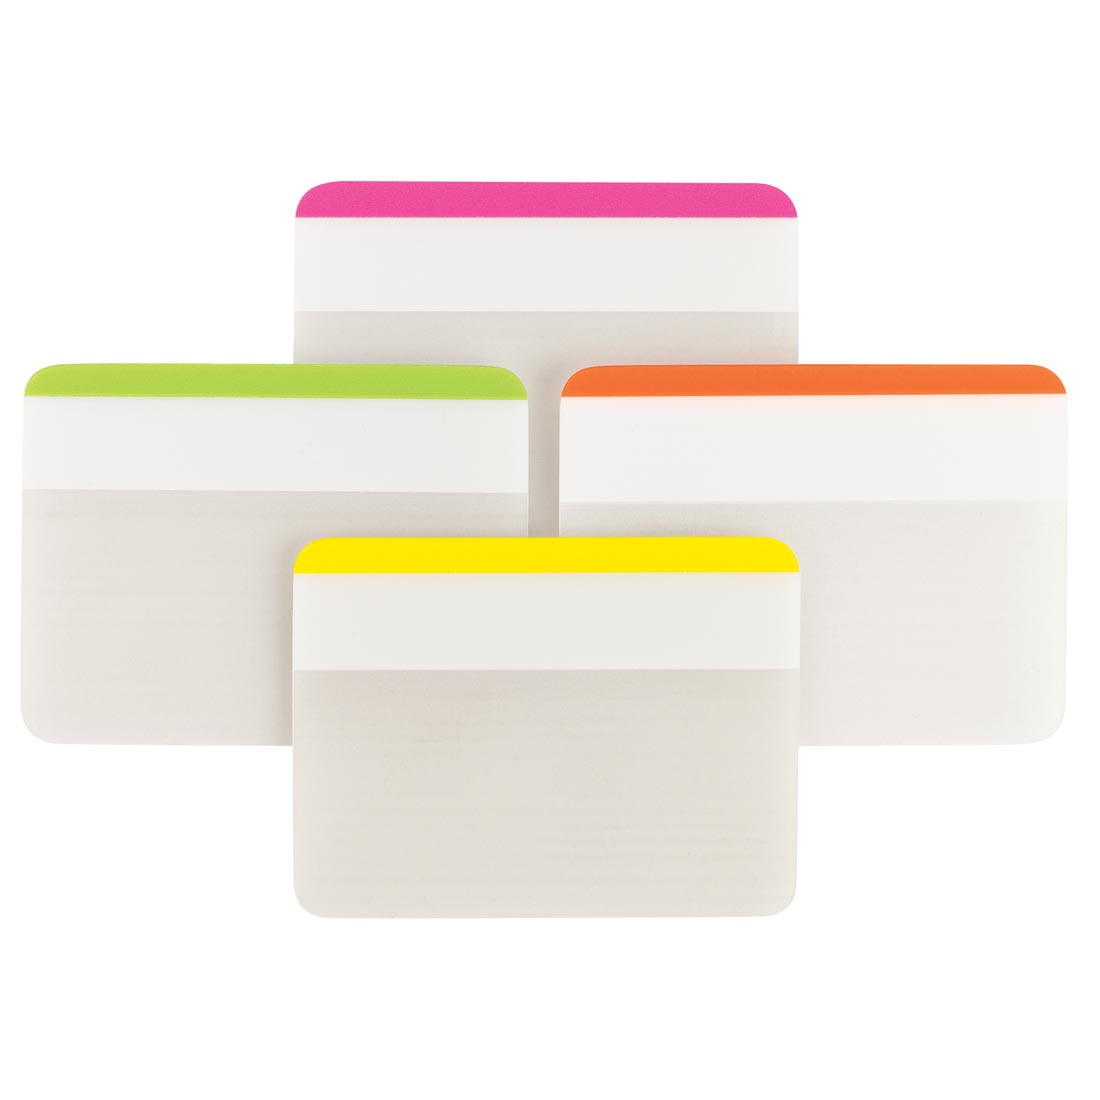 Post-it Durable File Folder Tabs in assorted colors